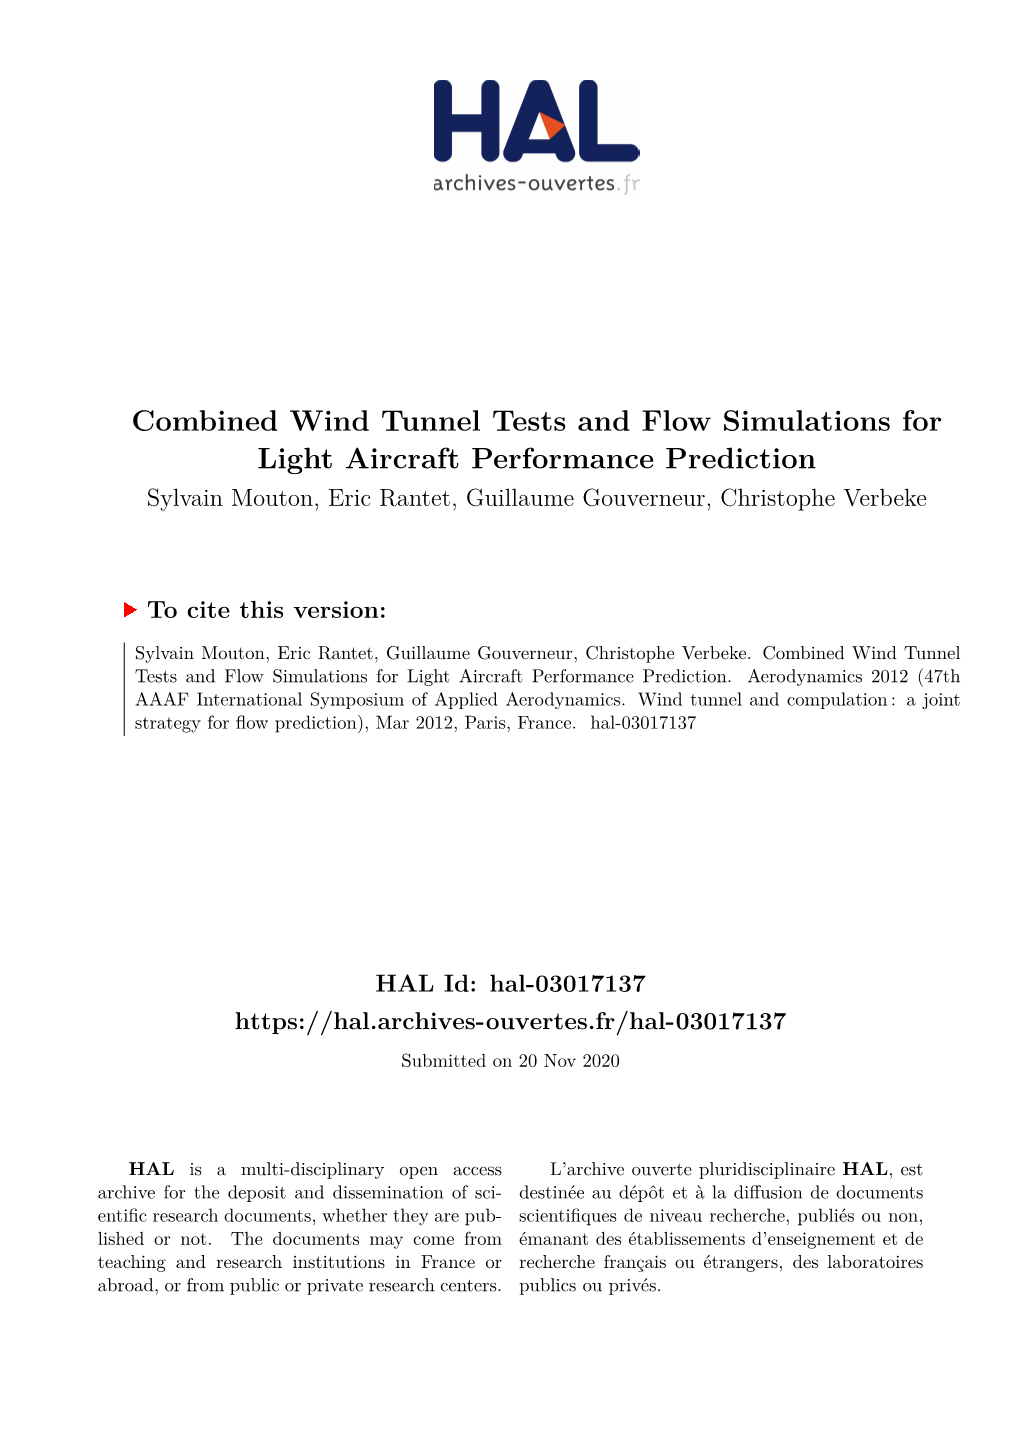 Combined Wind Tunnel Tests and Flow Simulations for Light Aircraft Performance Prediction Sylvain Mouton, Eric Rantet, Guillaume Gouverneur, Christophe Verbeke